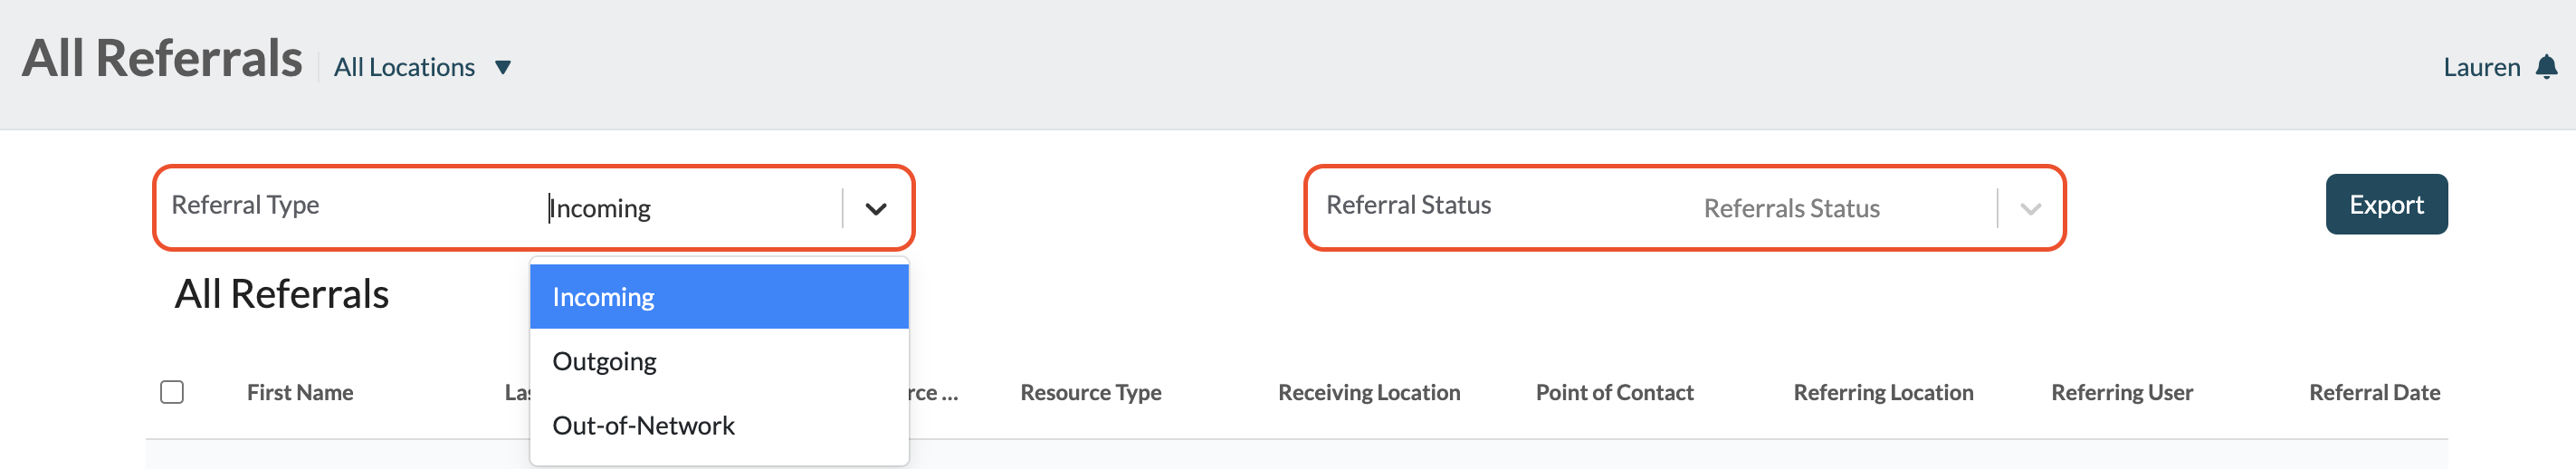 Referral Status and Type.png